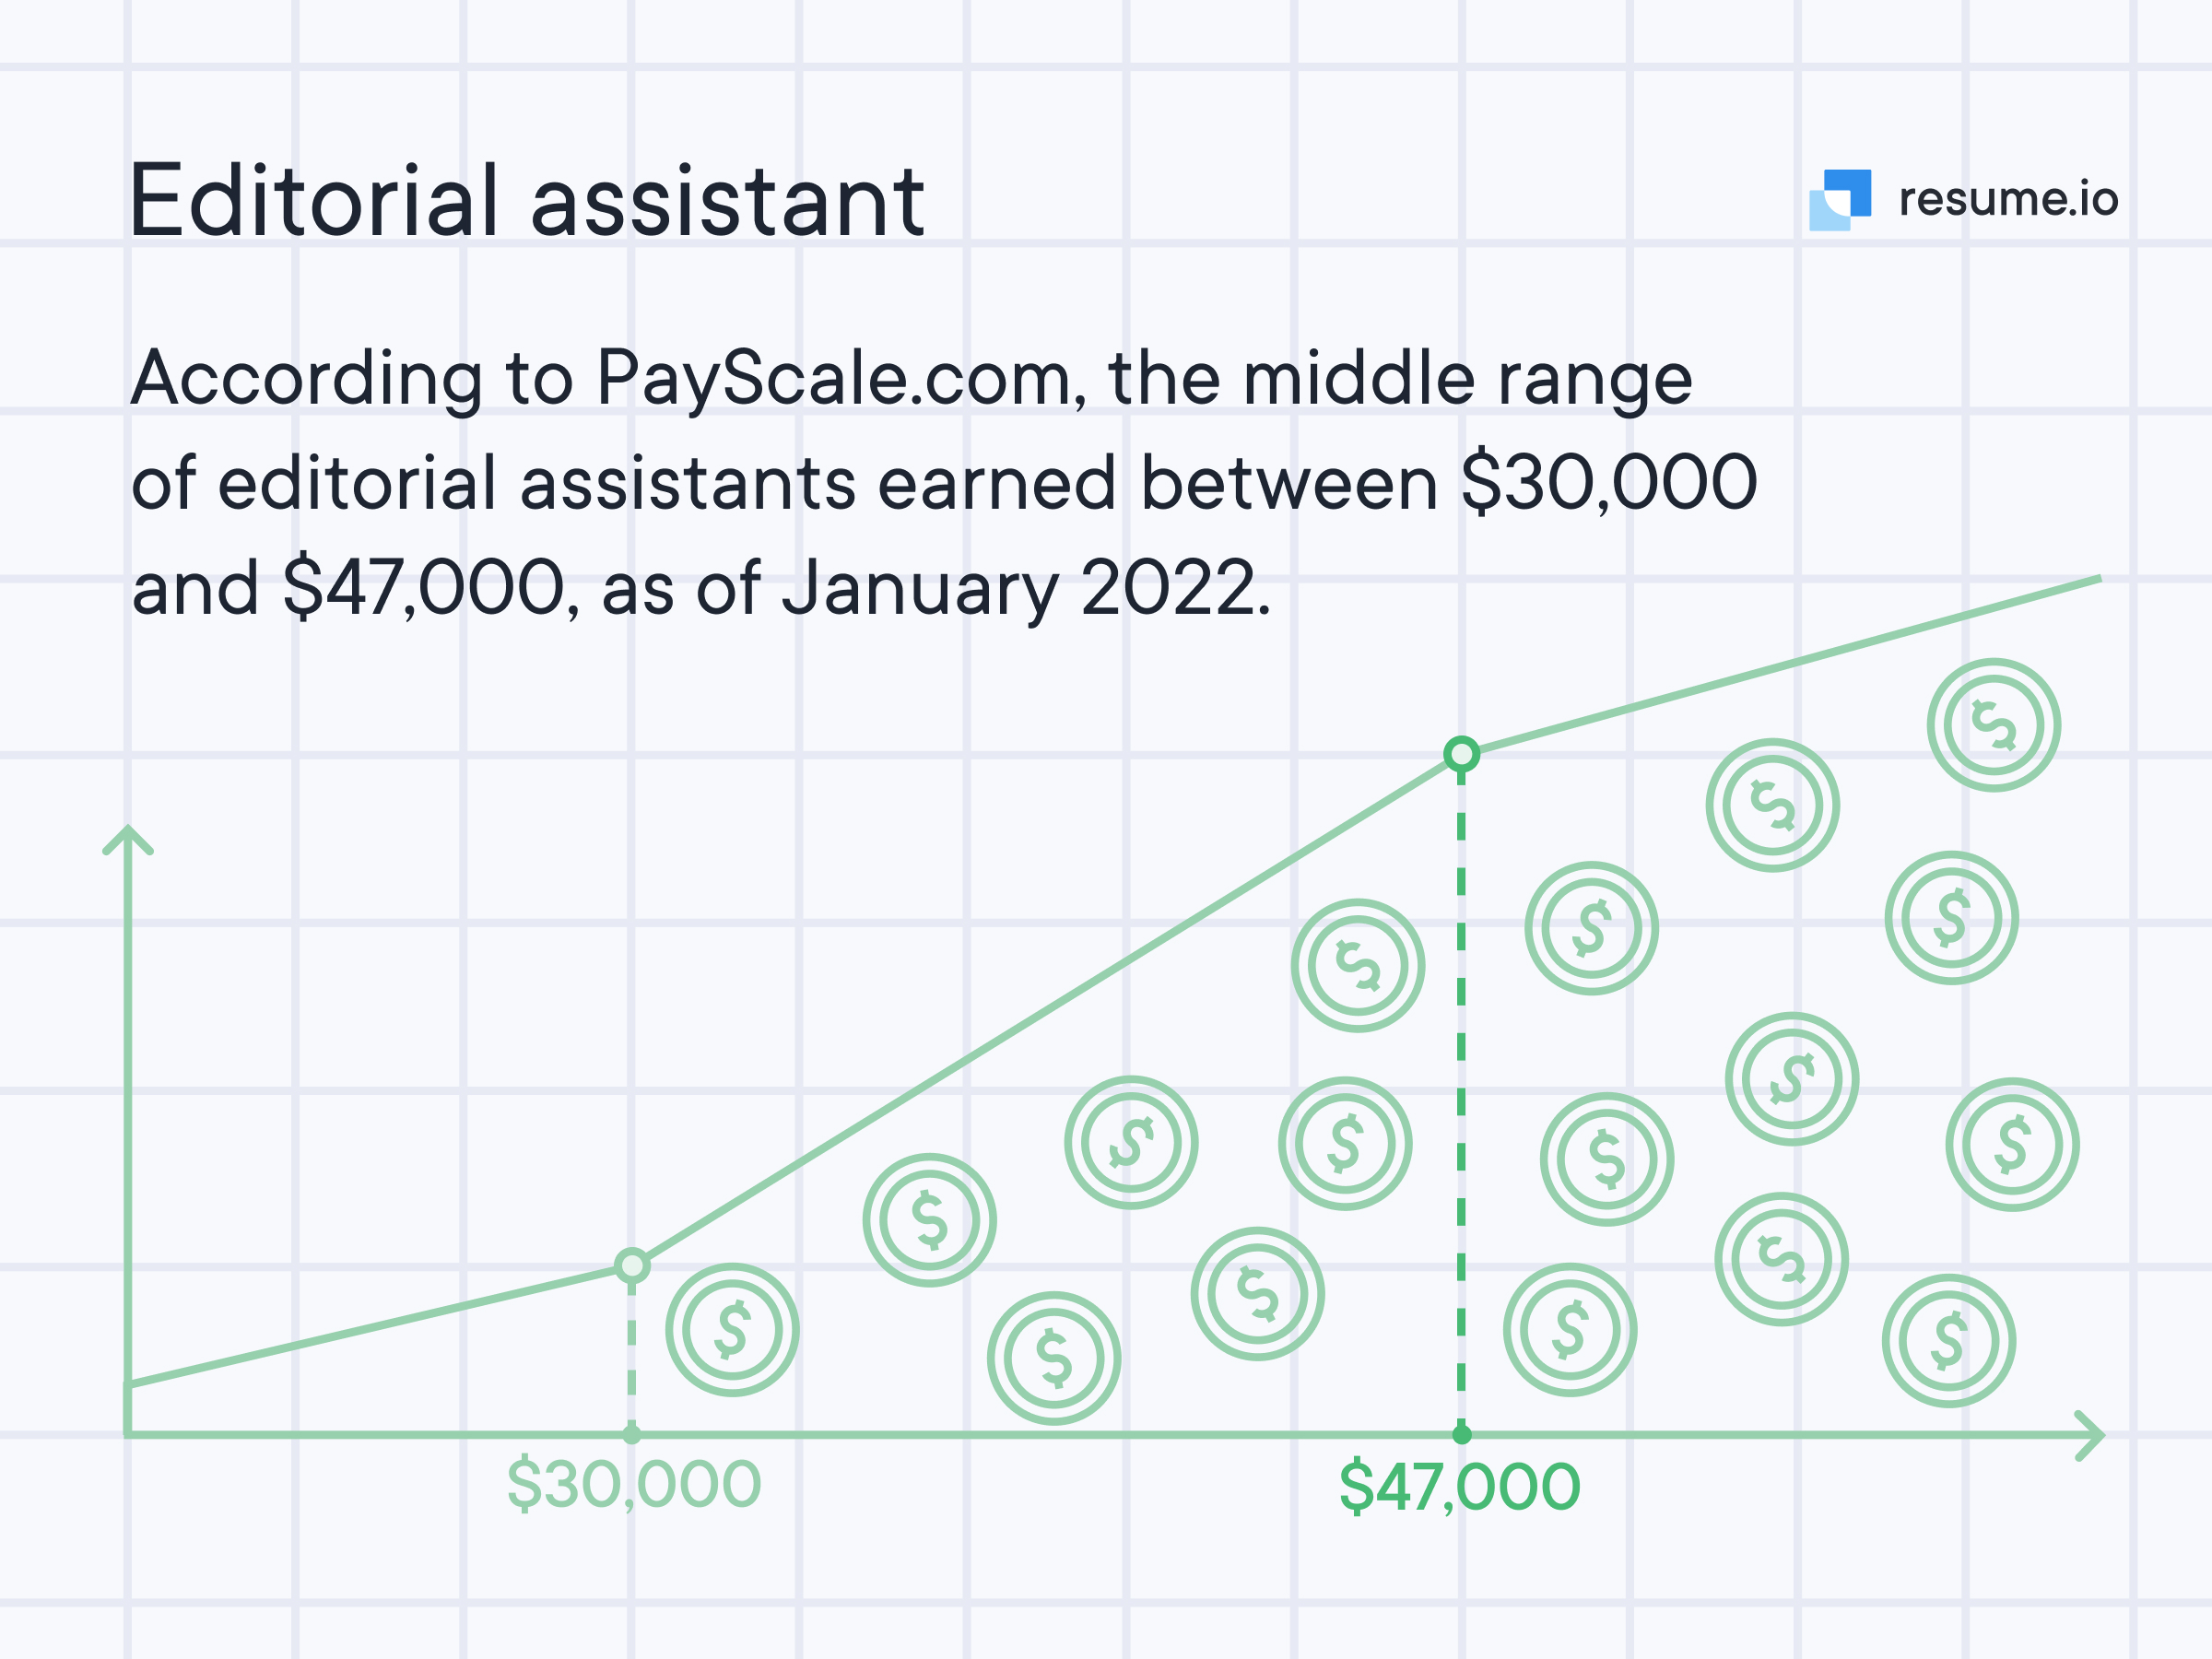 Line chart showing the middle range earnings for editorial assistants